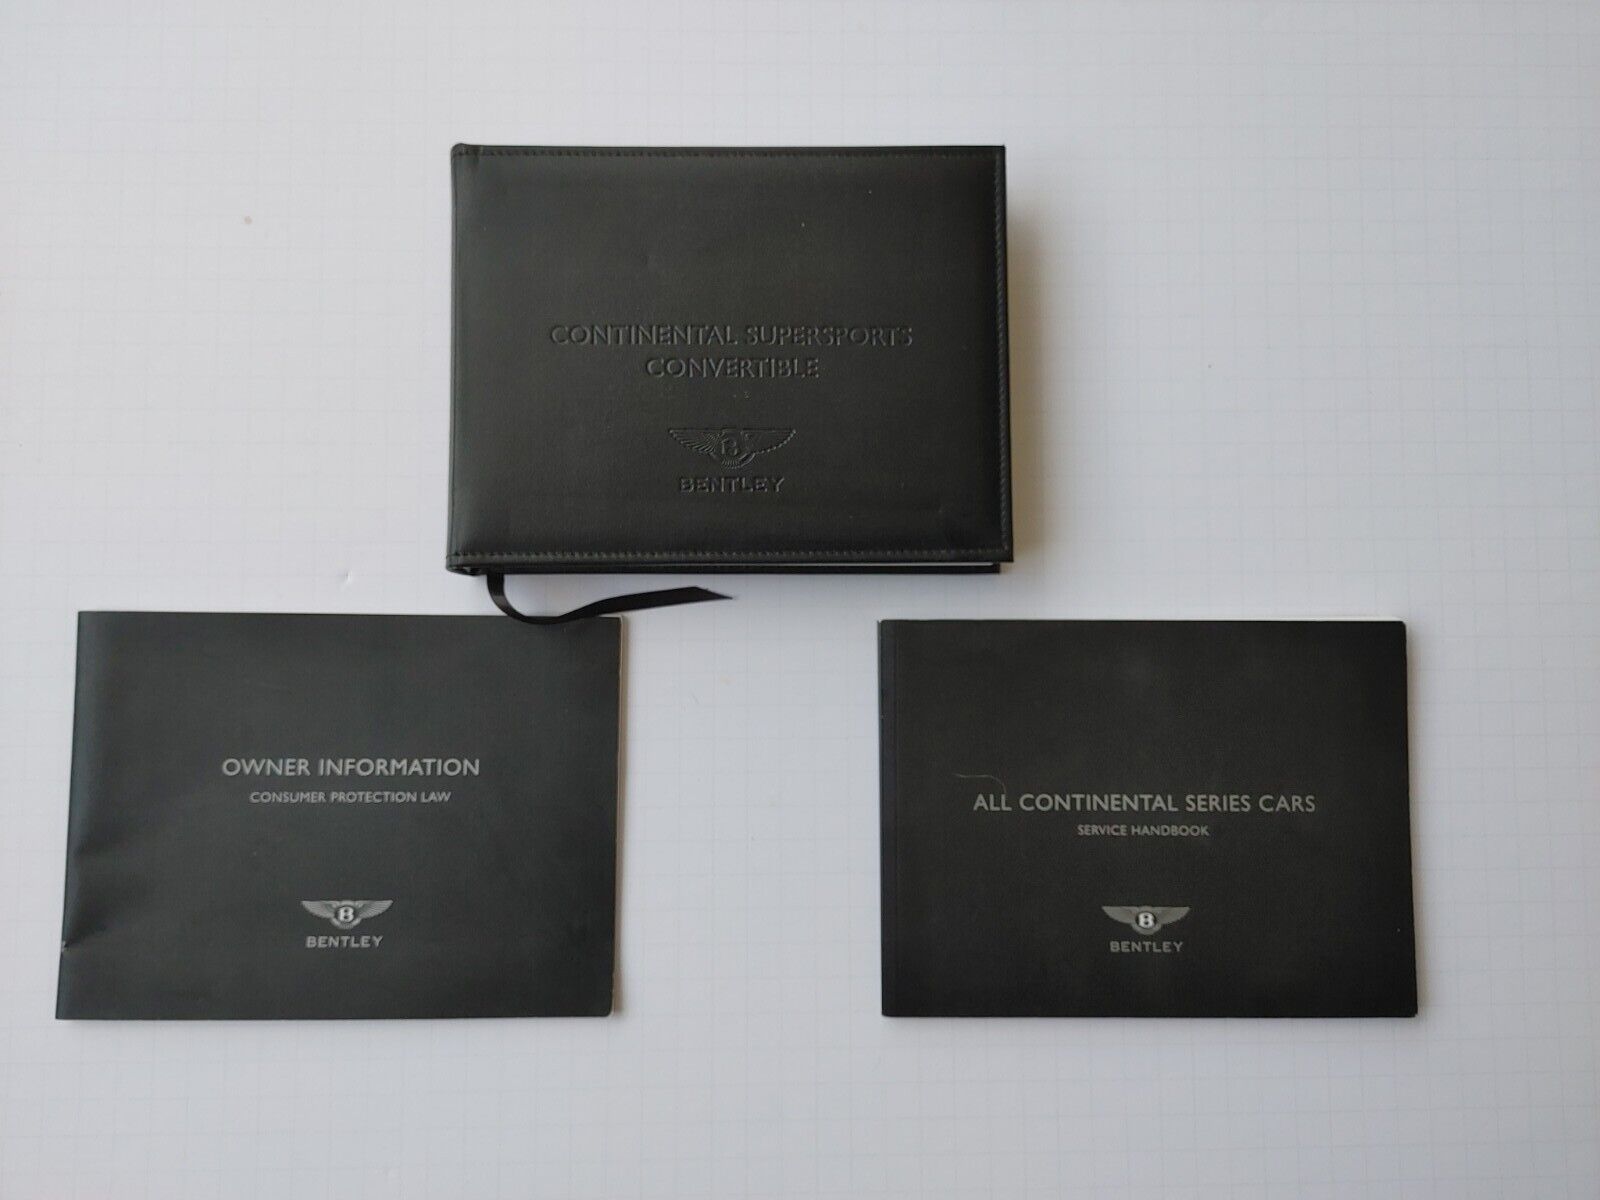  BENTLEY 2012 CONTINENTAL SUPERSPORTS CONVERTIBLE  OWNER'S MANUAL INCLUDES ISR